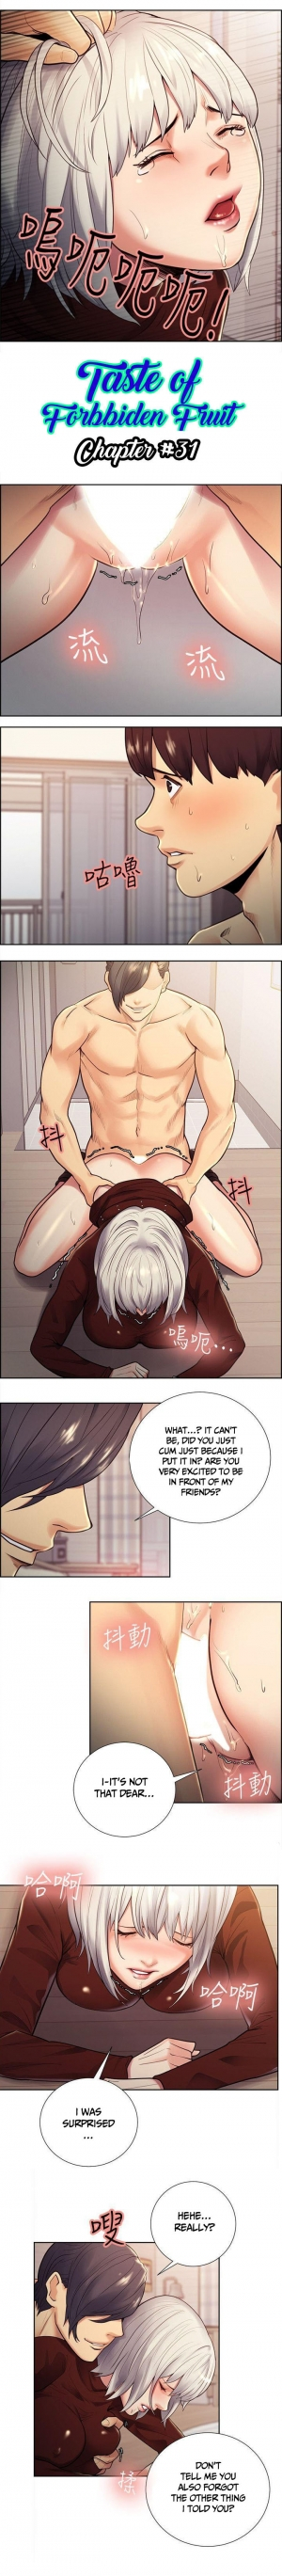 [Serious] Taste of Forbbiden Fruit Ch.36/53 [English] [Hentai Universe] - Page 576